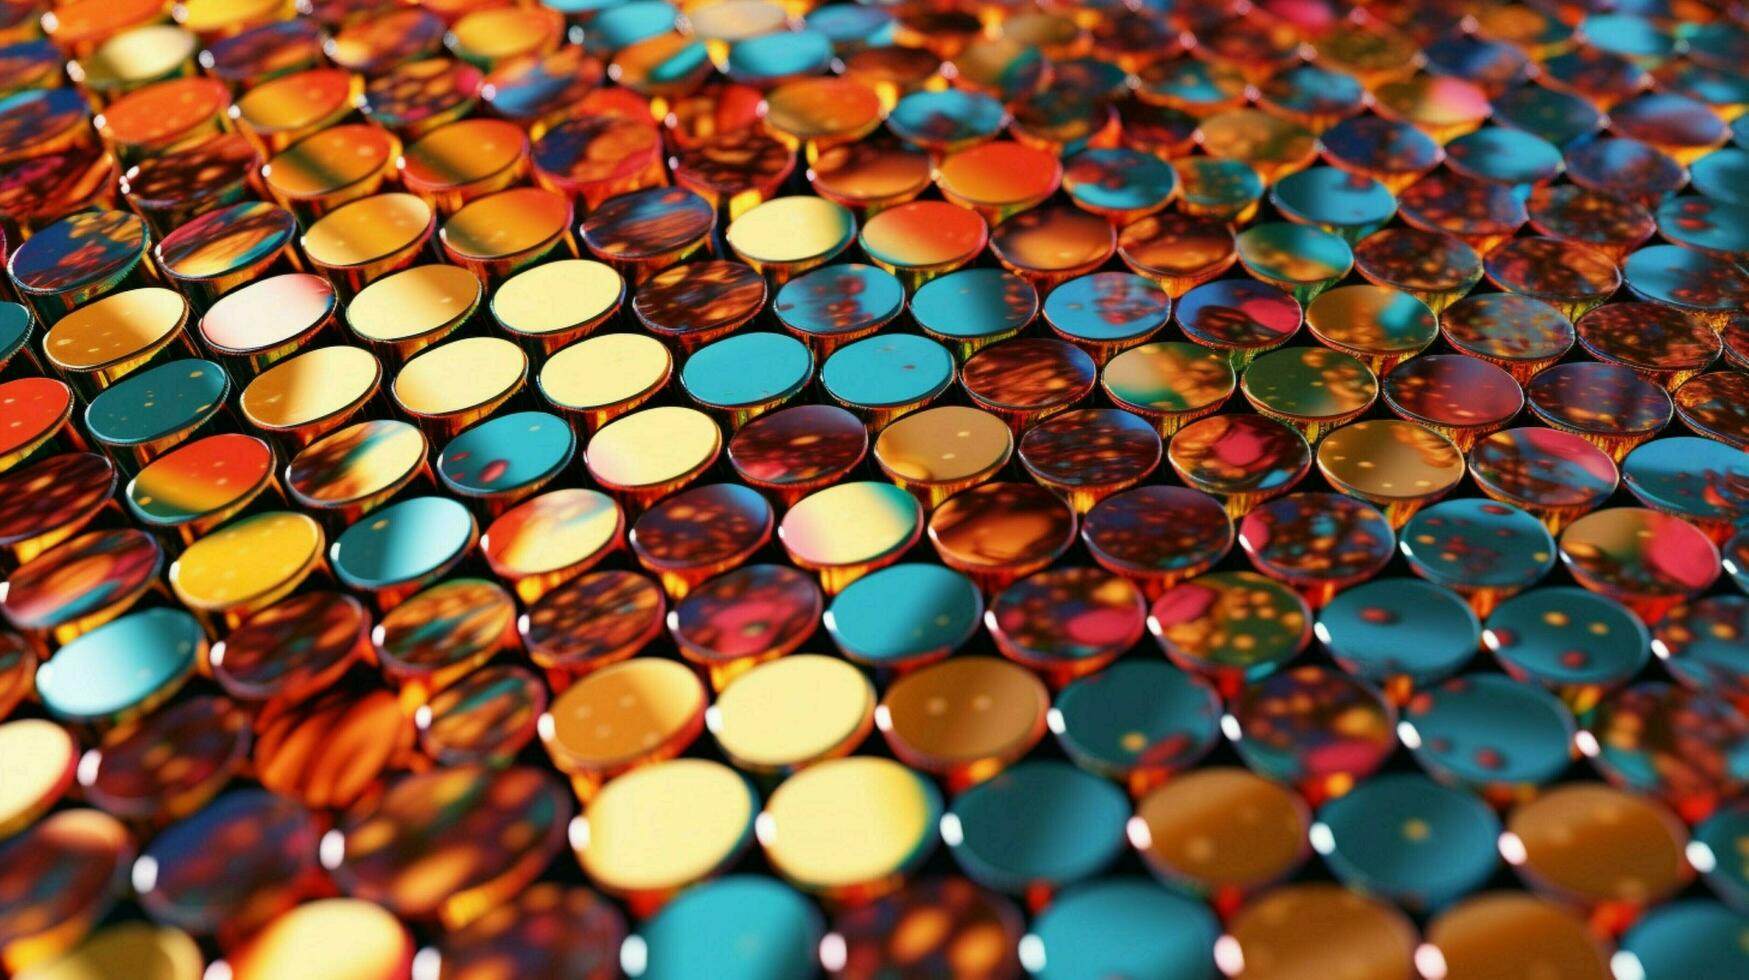 a close up of a shiny metallic and colorful surfa photo